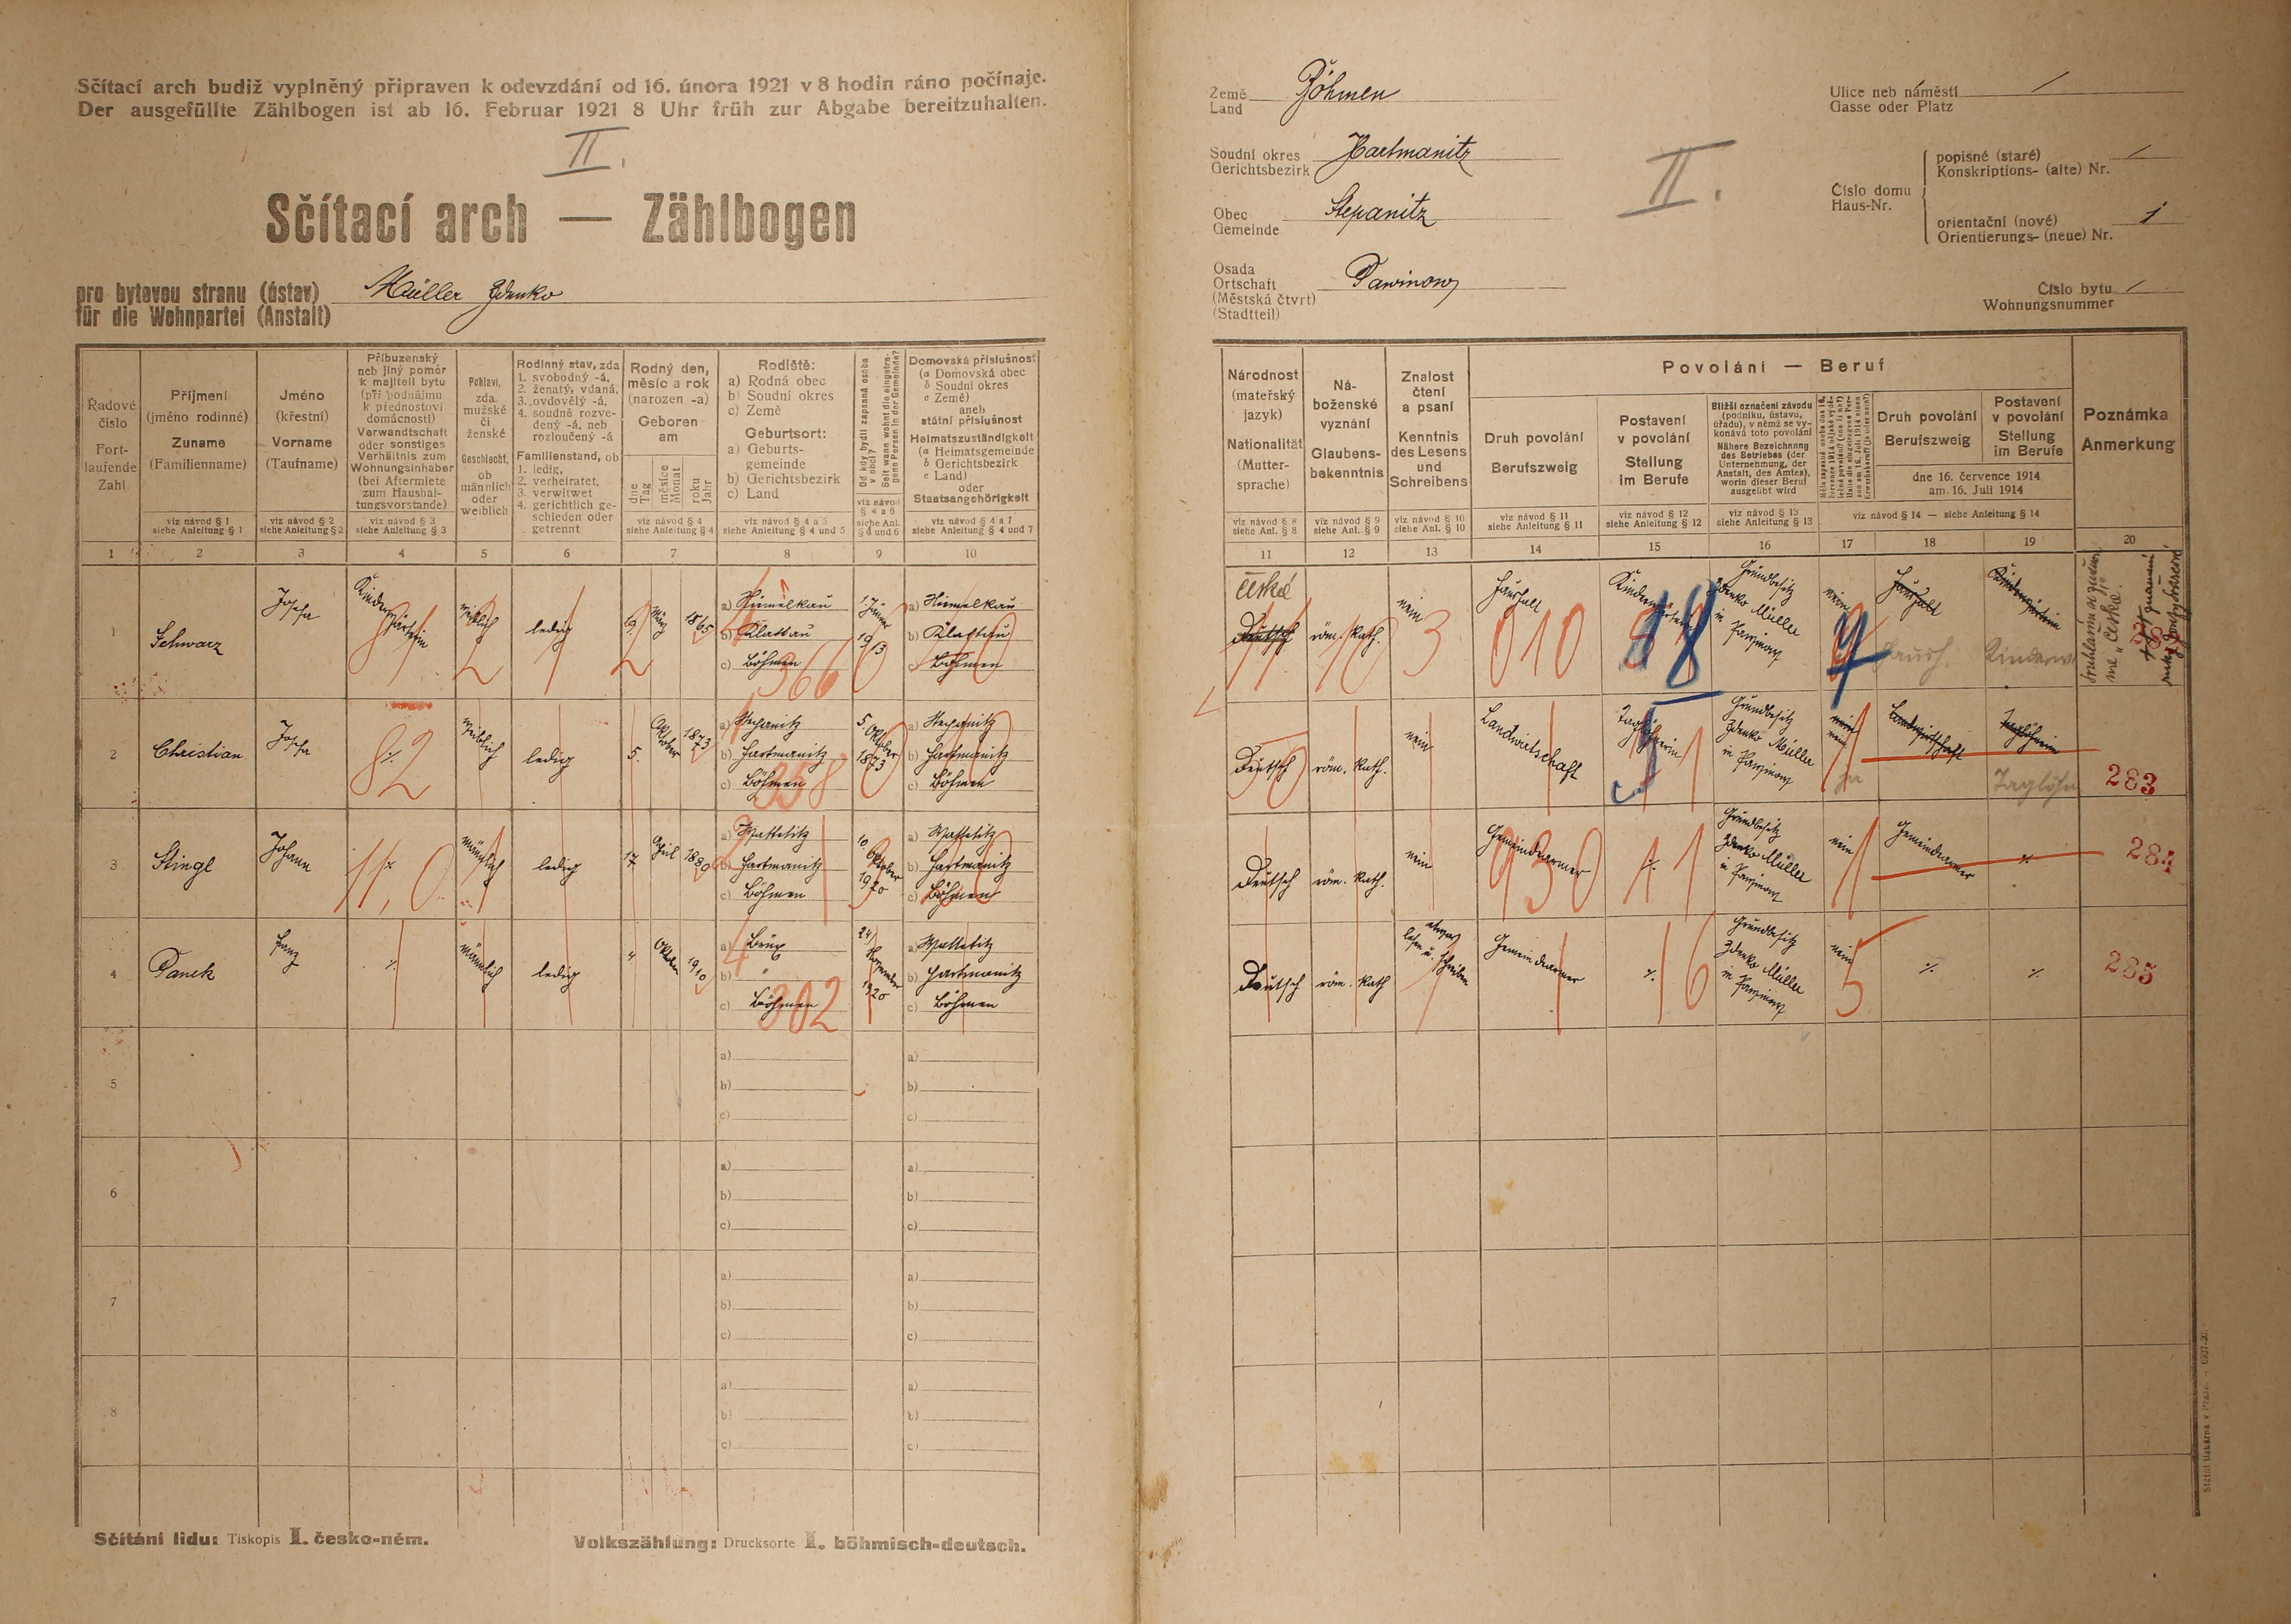 4. soap-kt_01159_census-1921-stepanice-cp001_0040